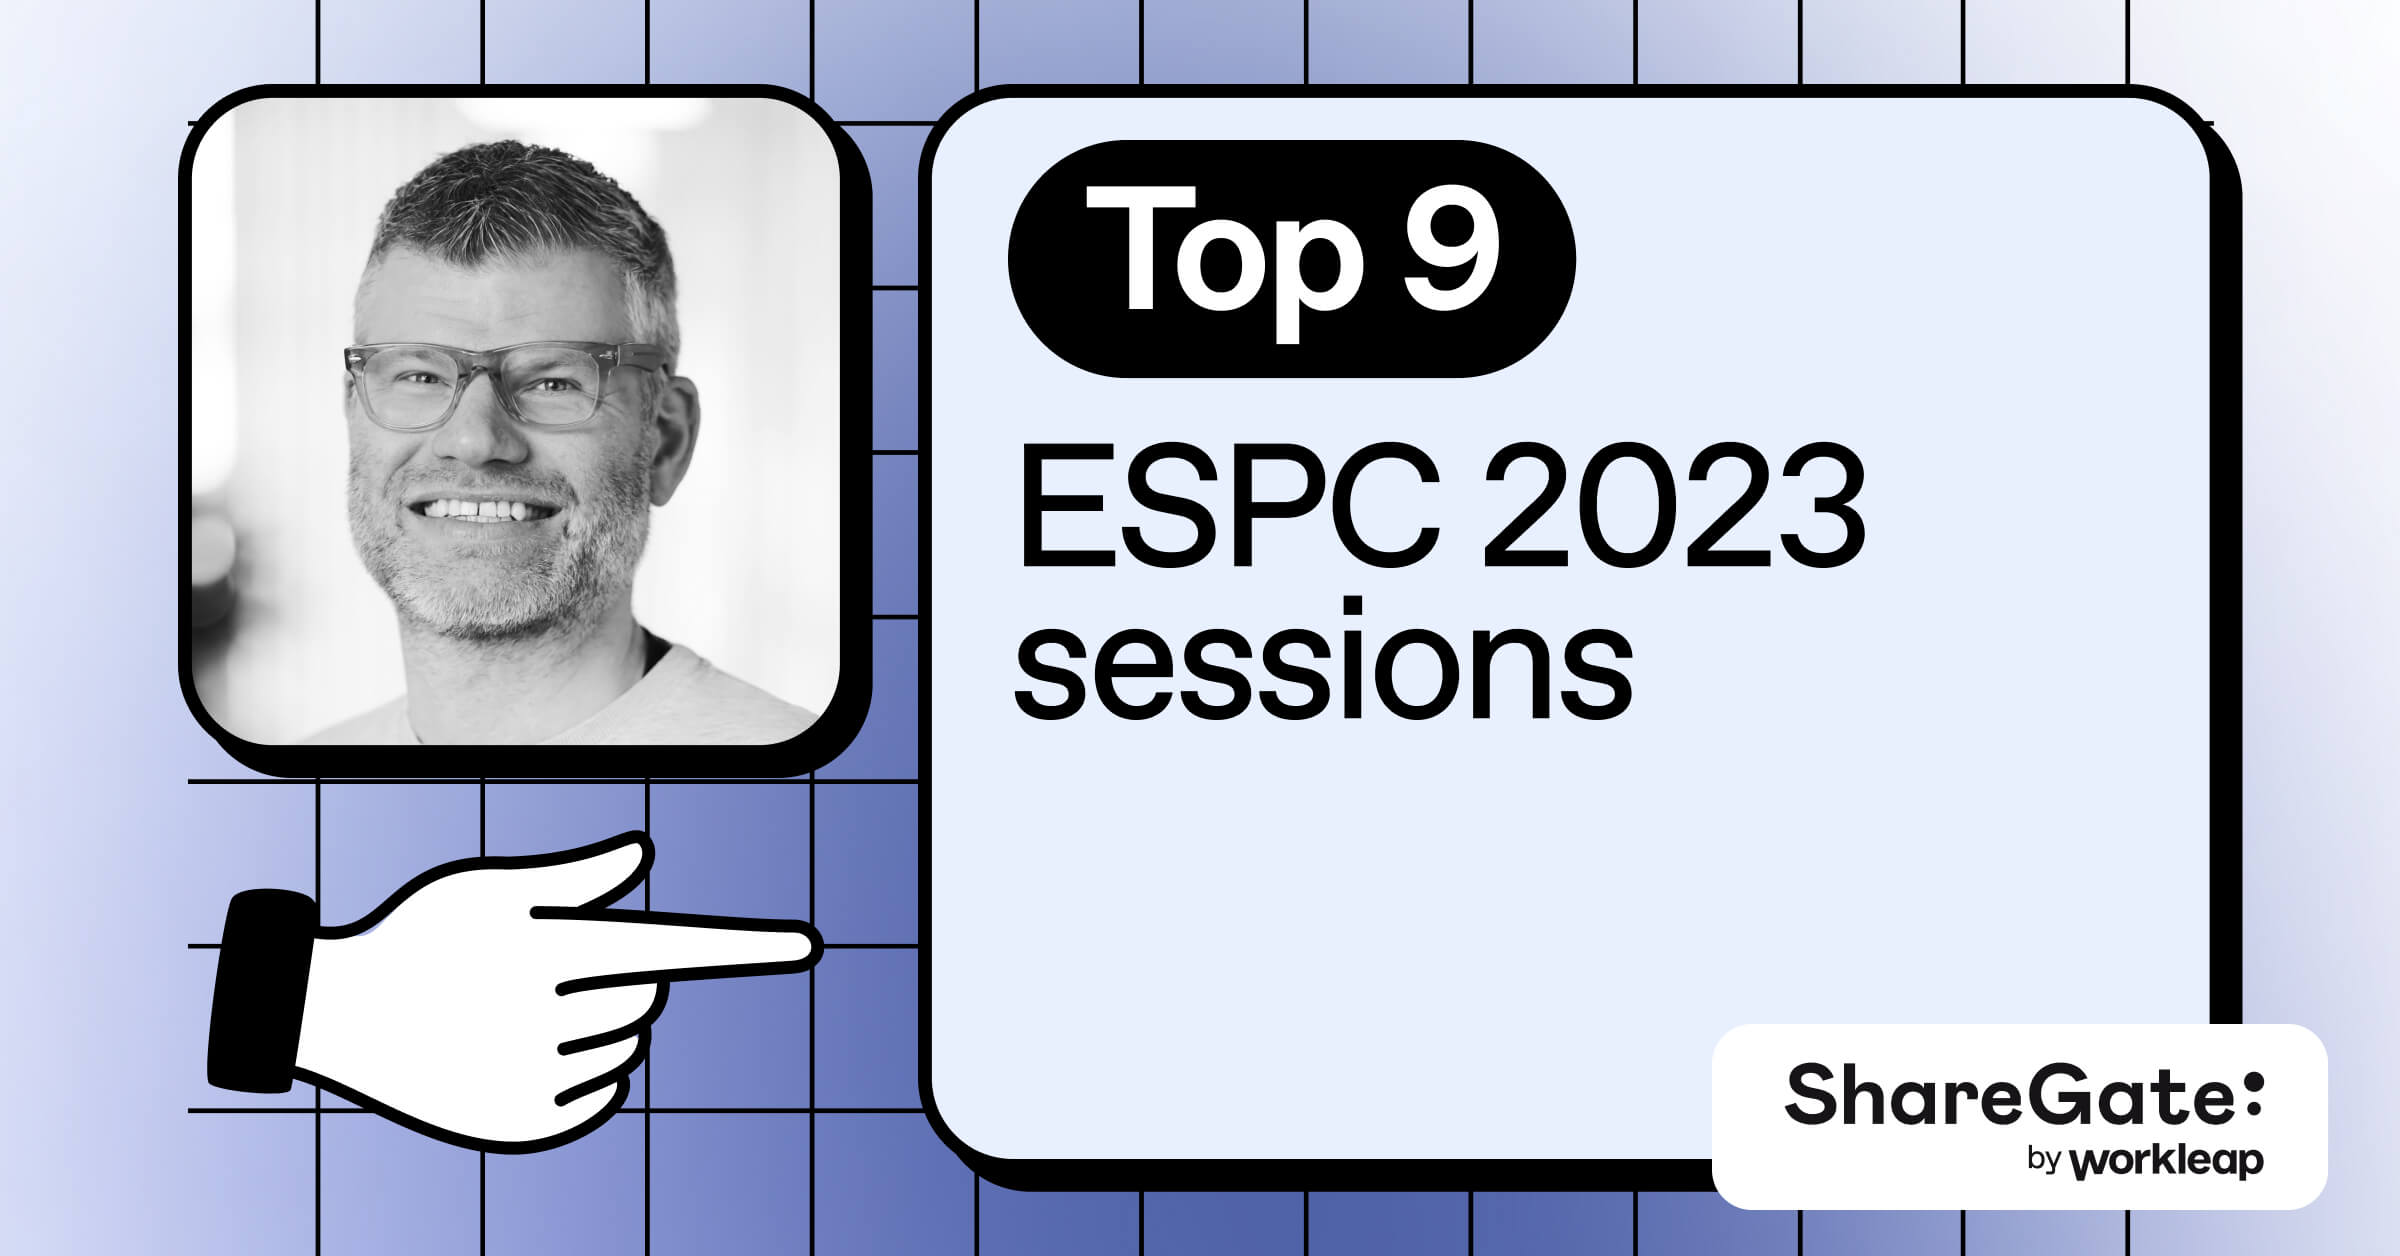 Top 9 ESPC 2023 sessions to manage Microsoft 365 